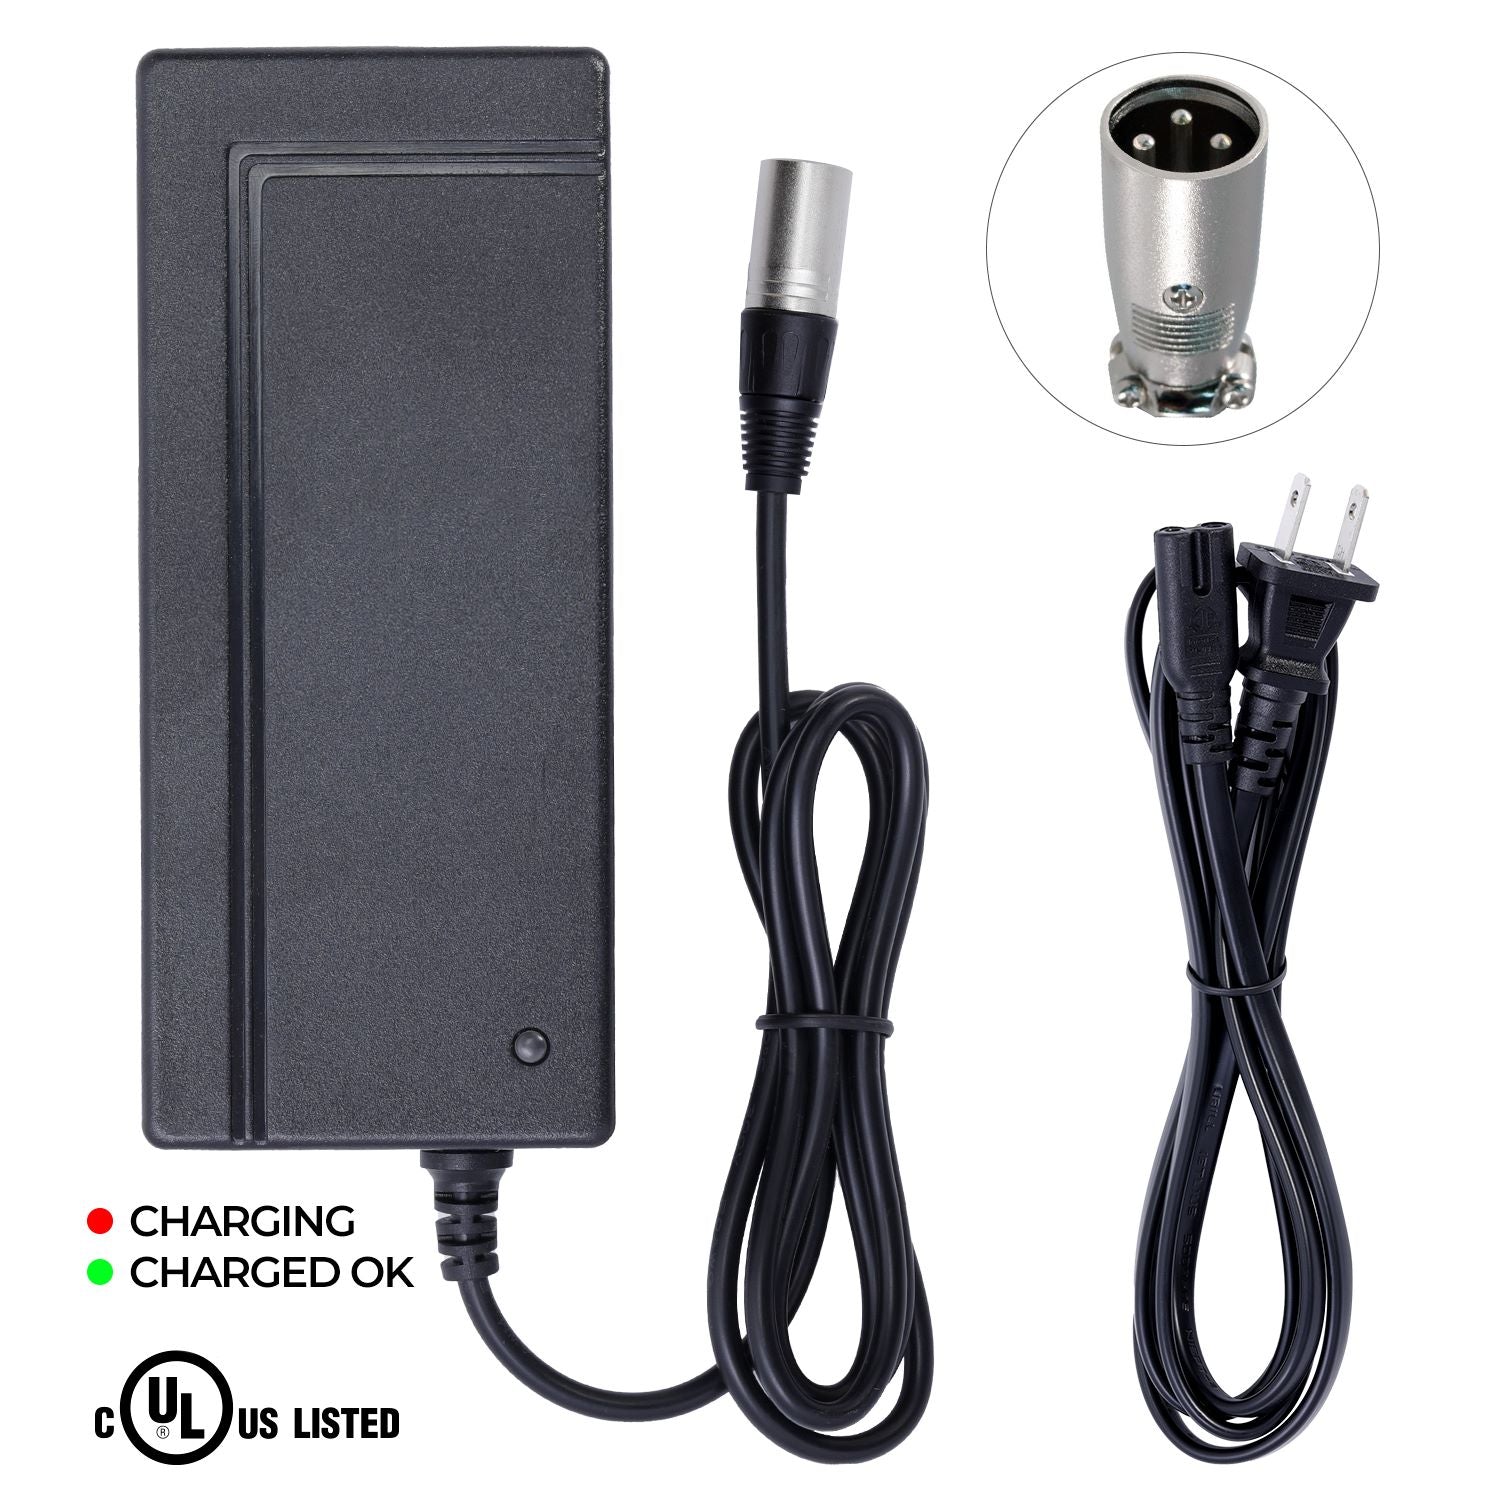 24V 2A UL Certified Charger for KYMCO Mini Comfort Mobility Scooter